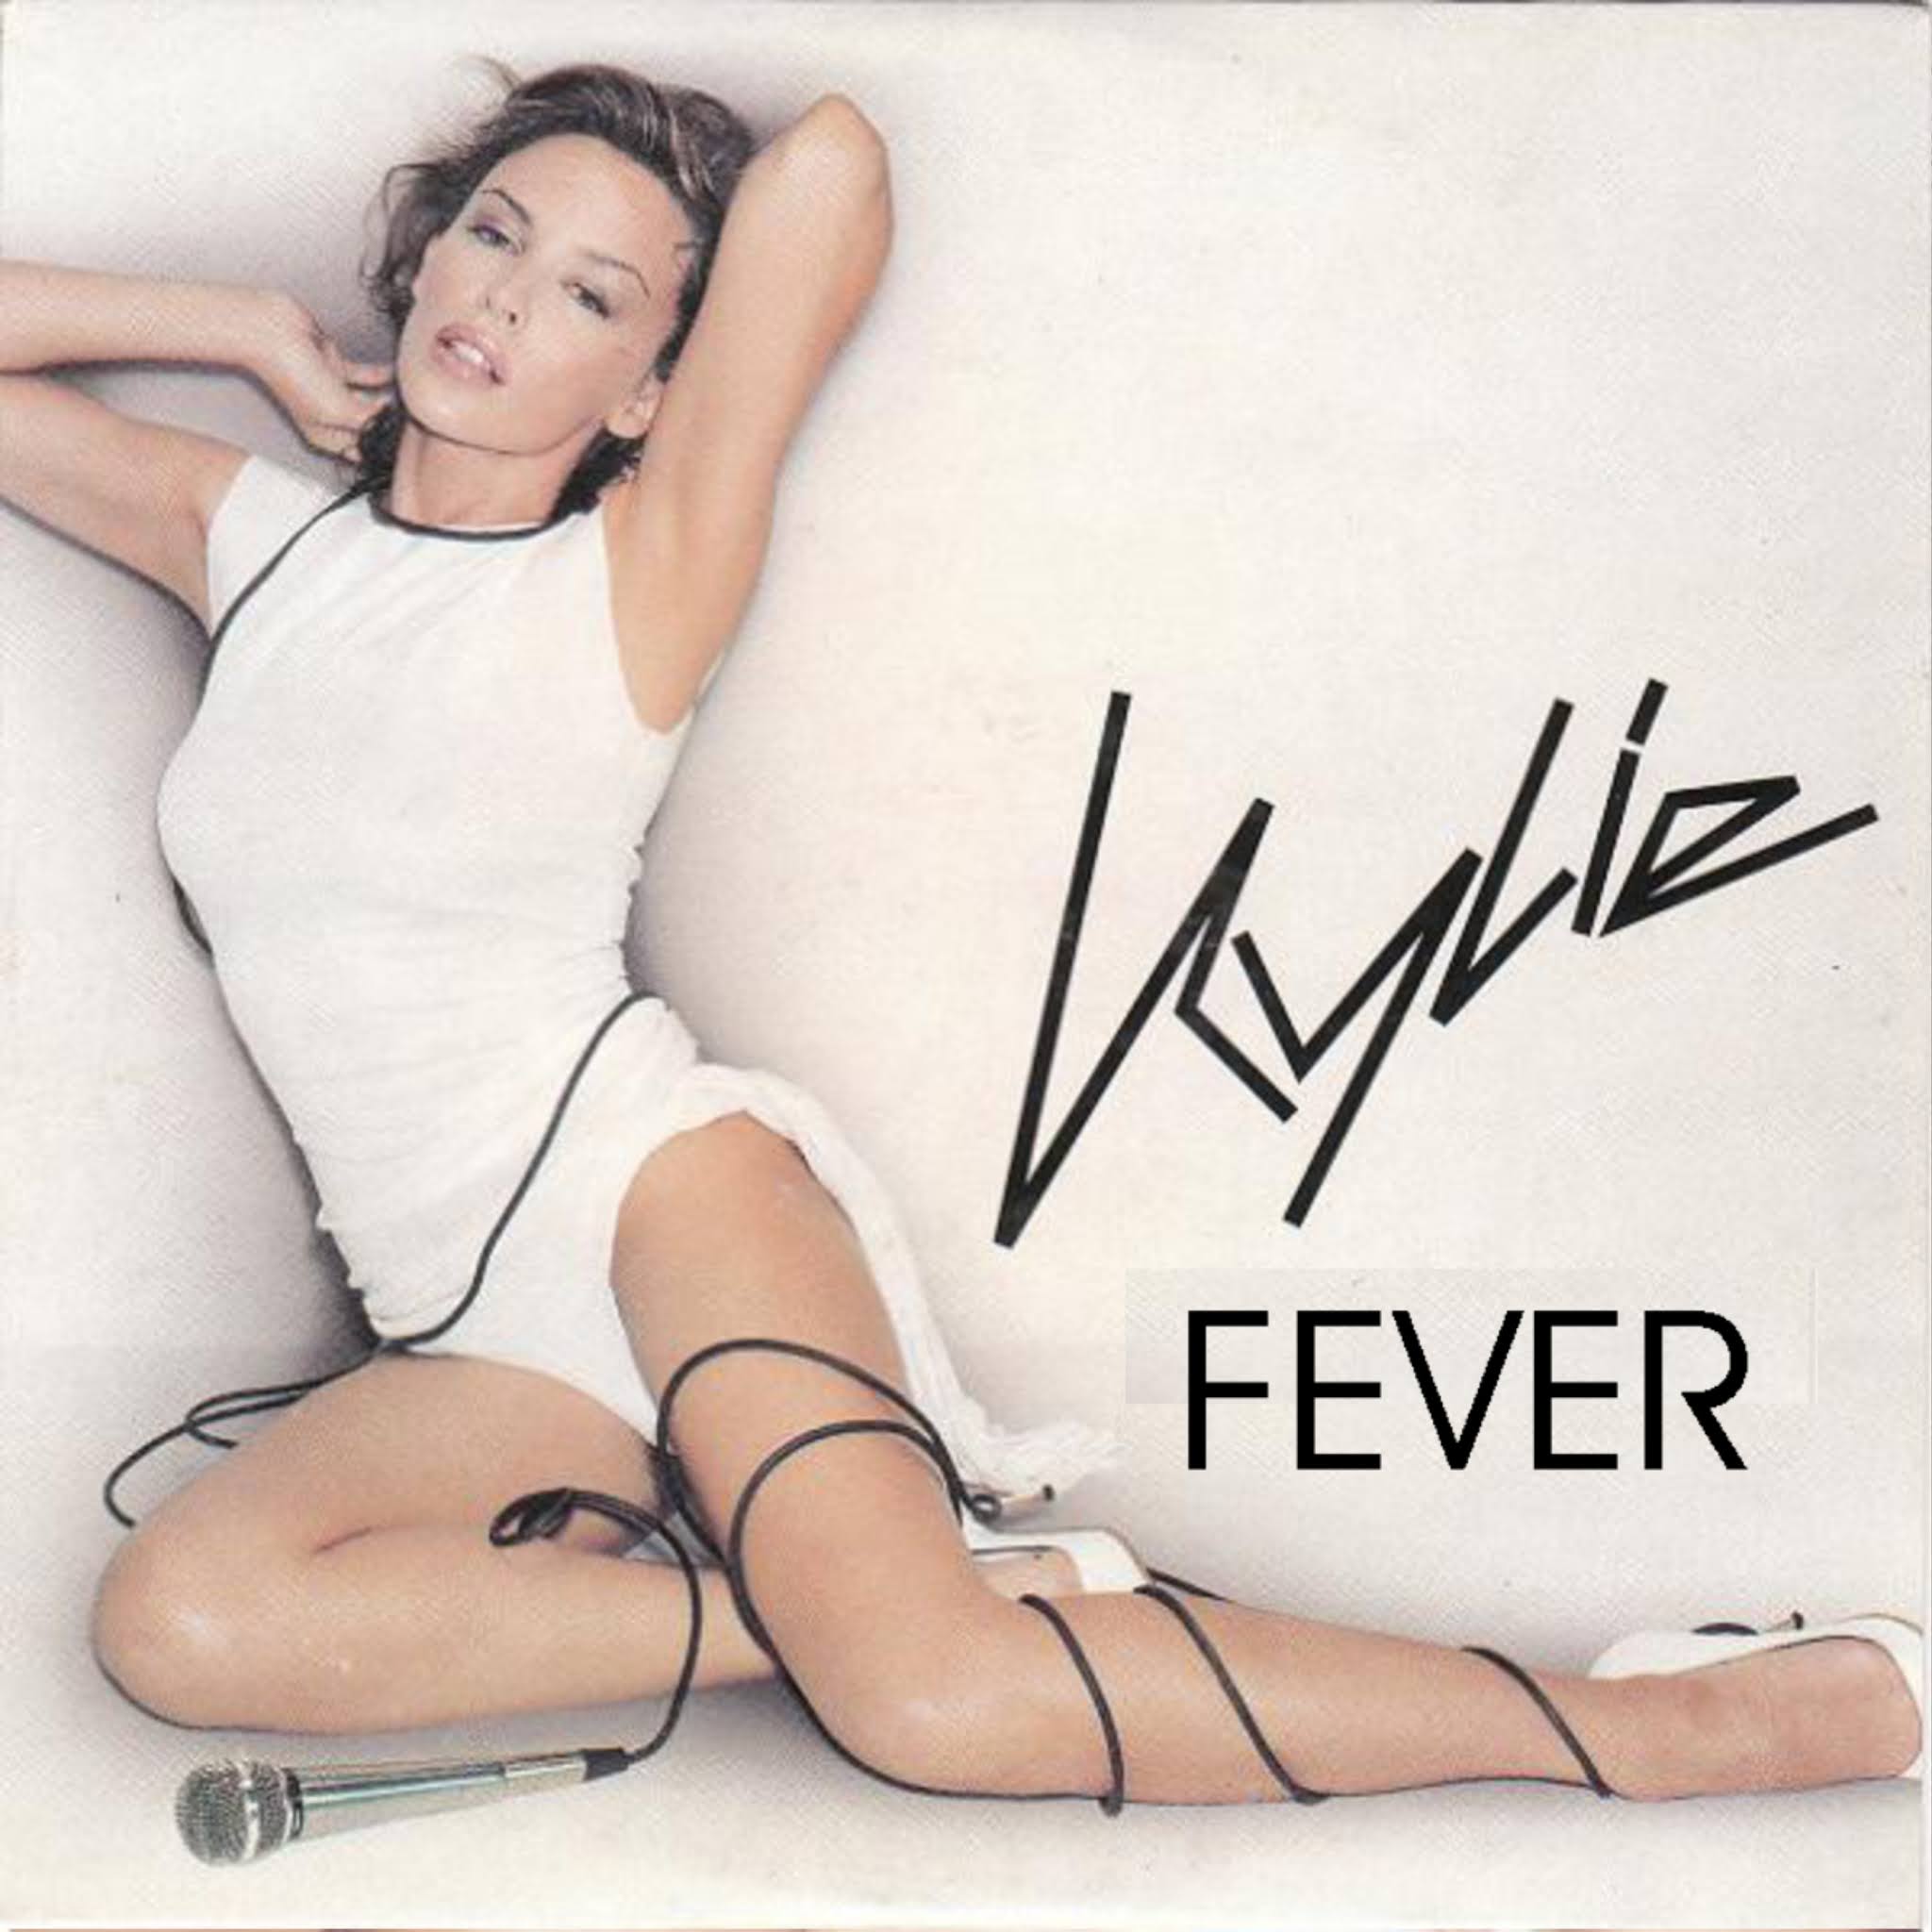 Can get out of my head перевод. Kylie Minogue обложка. Kylie Minogue 1997.